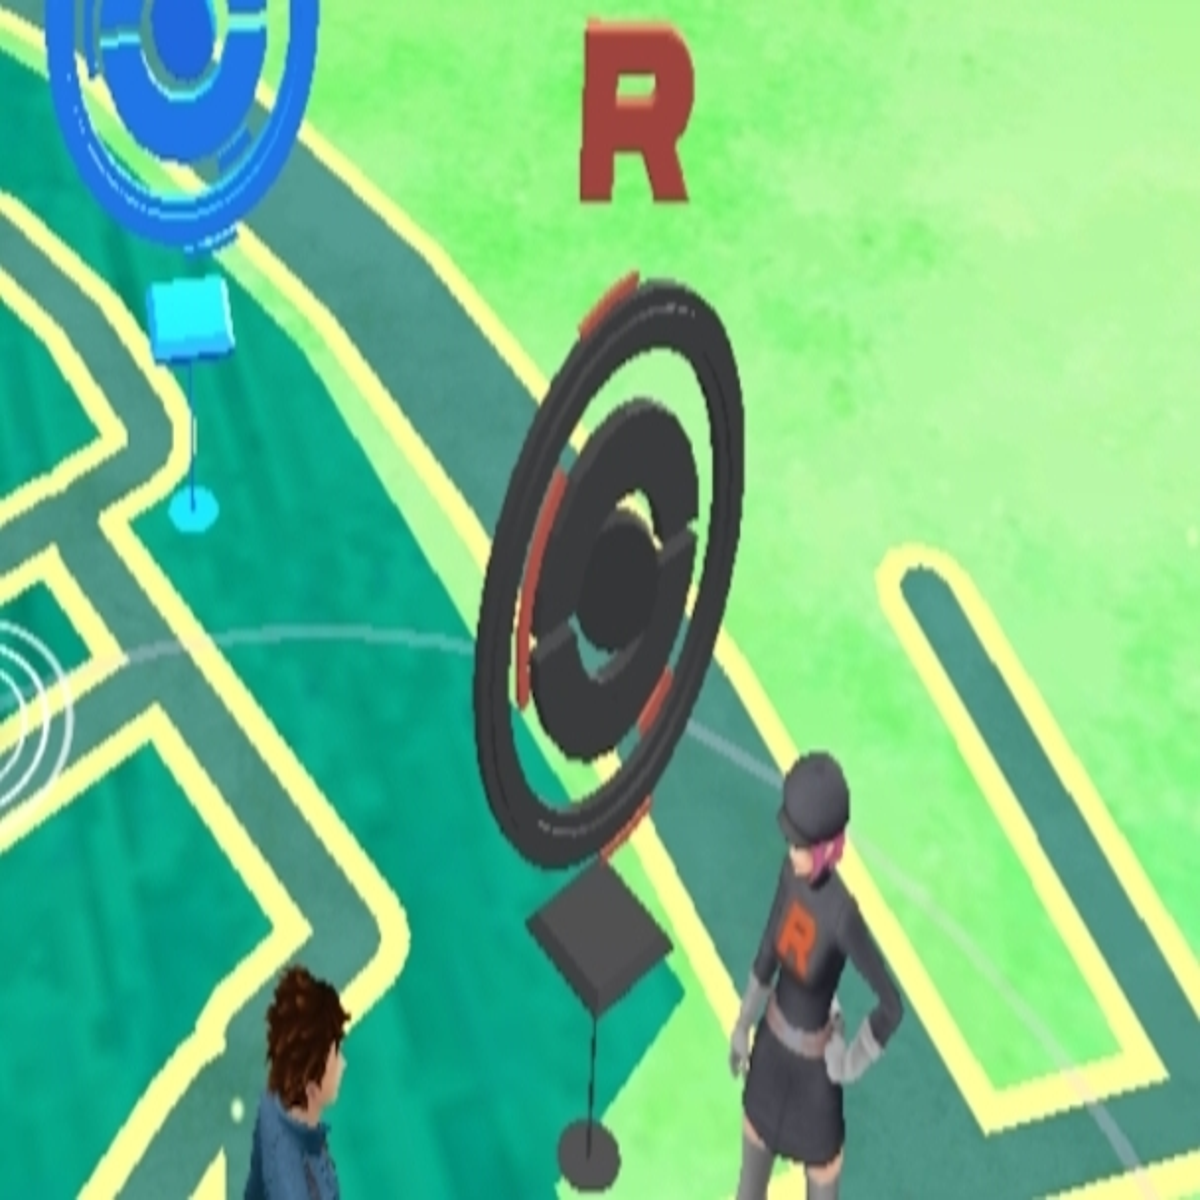 Prepare for trouble? Might as well make it double - Team Rocket